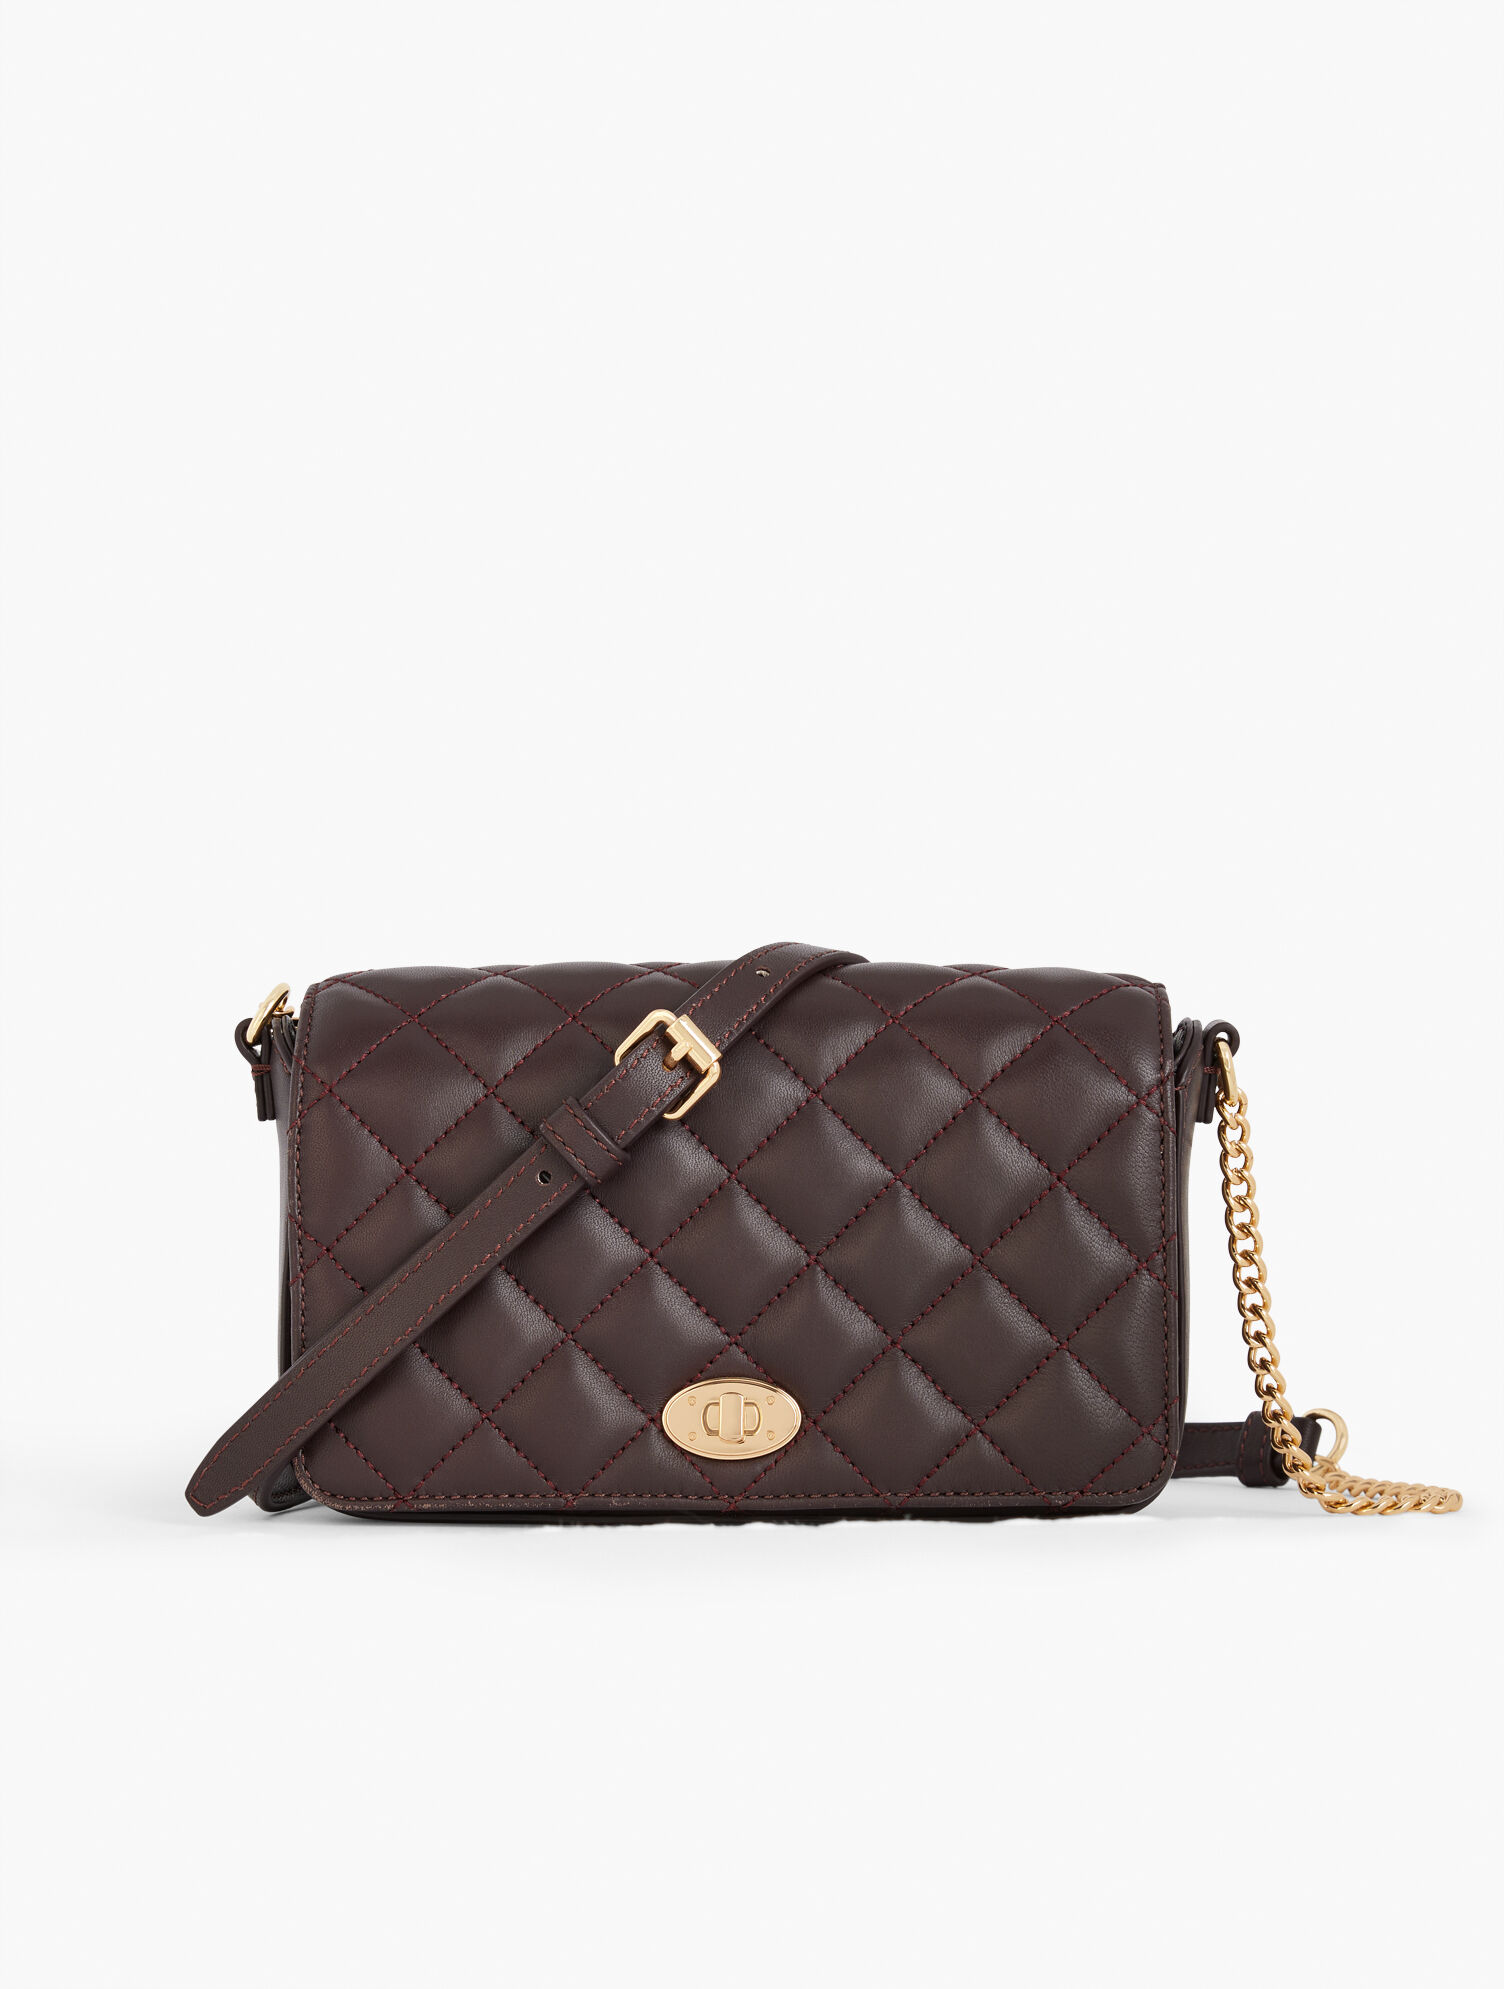 Chain Strap Crossbody Bag - Quilted Leather